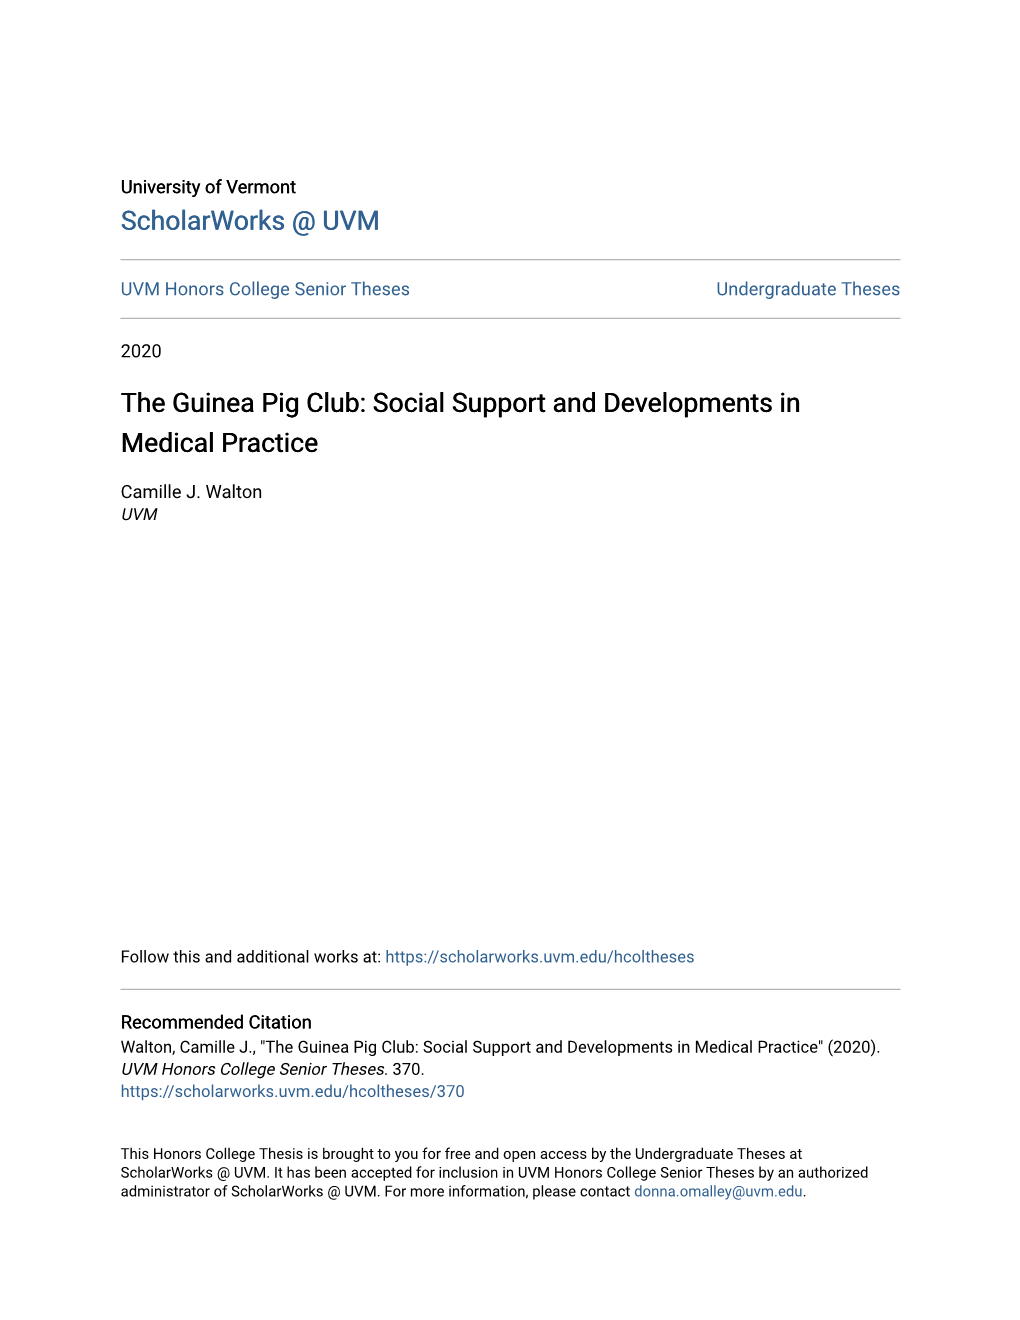 The Guinea Pig Club: Social Support and Developments in Medical Practice